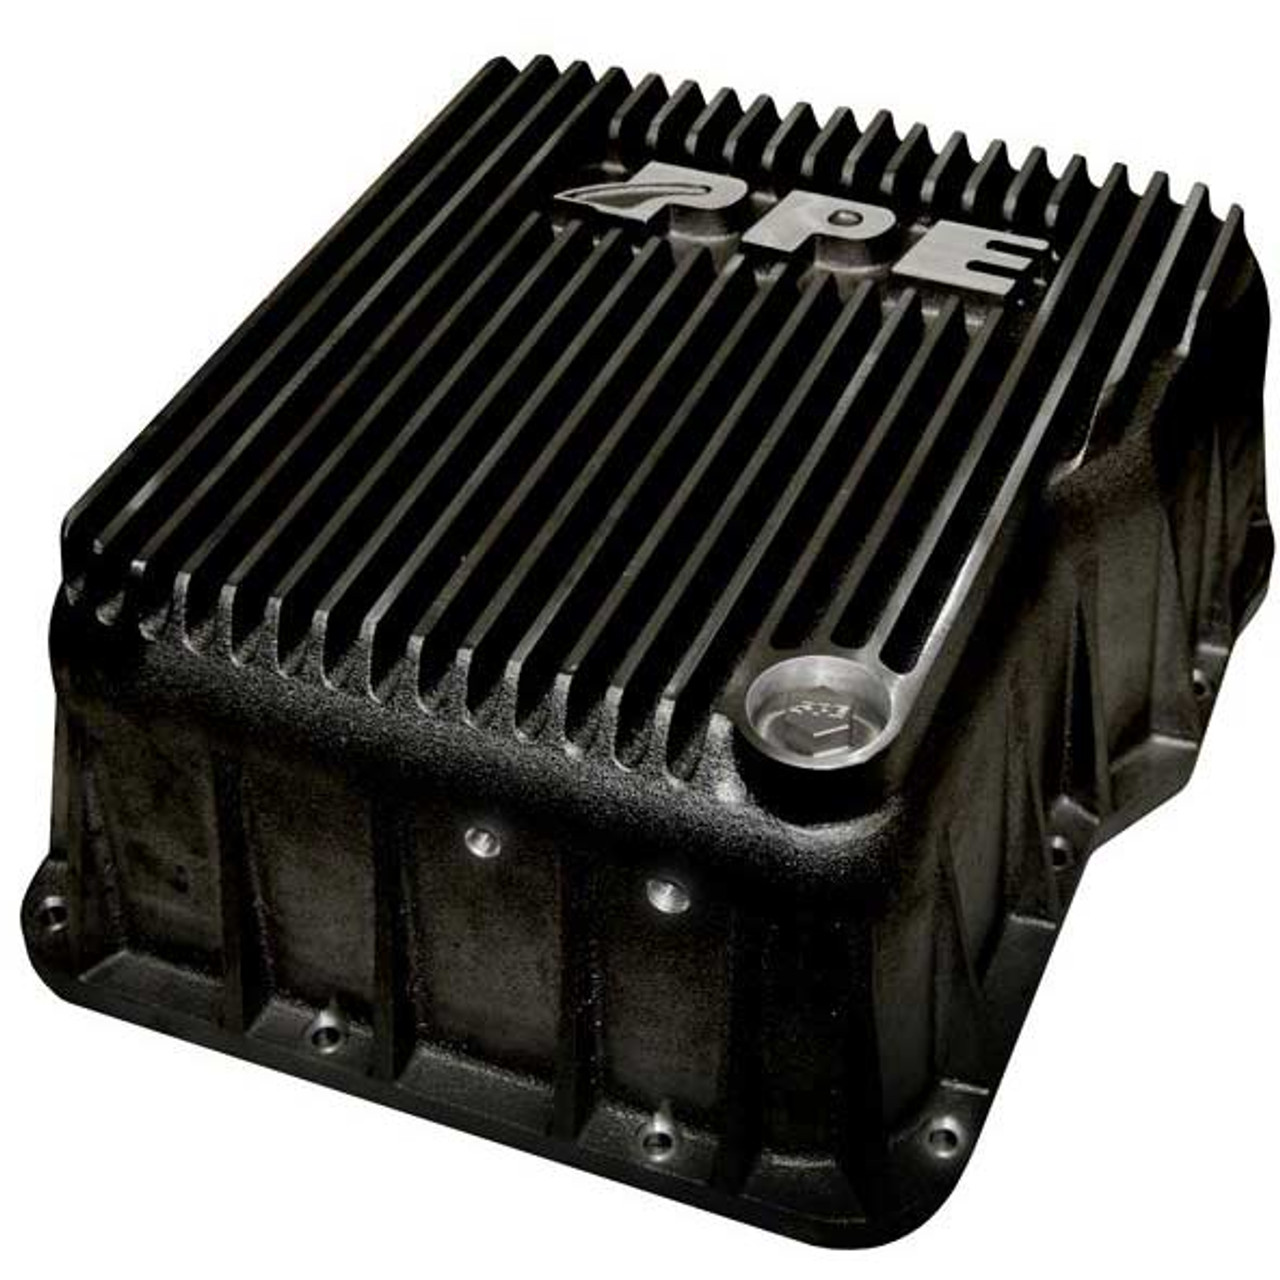 PPE DEEP ALLISON TRANSMISSION PAN - BLACK 2001-2019 GM 6.6L DURAMAX (EQUIPPED WITH ALLISON 1000 / 2000 / 2400) (PPE128051020)Pan View